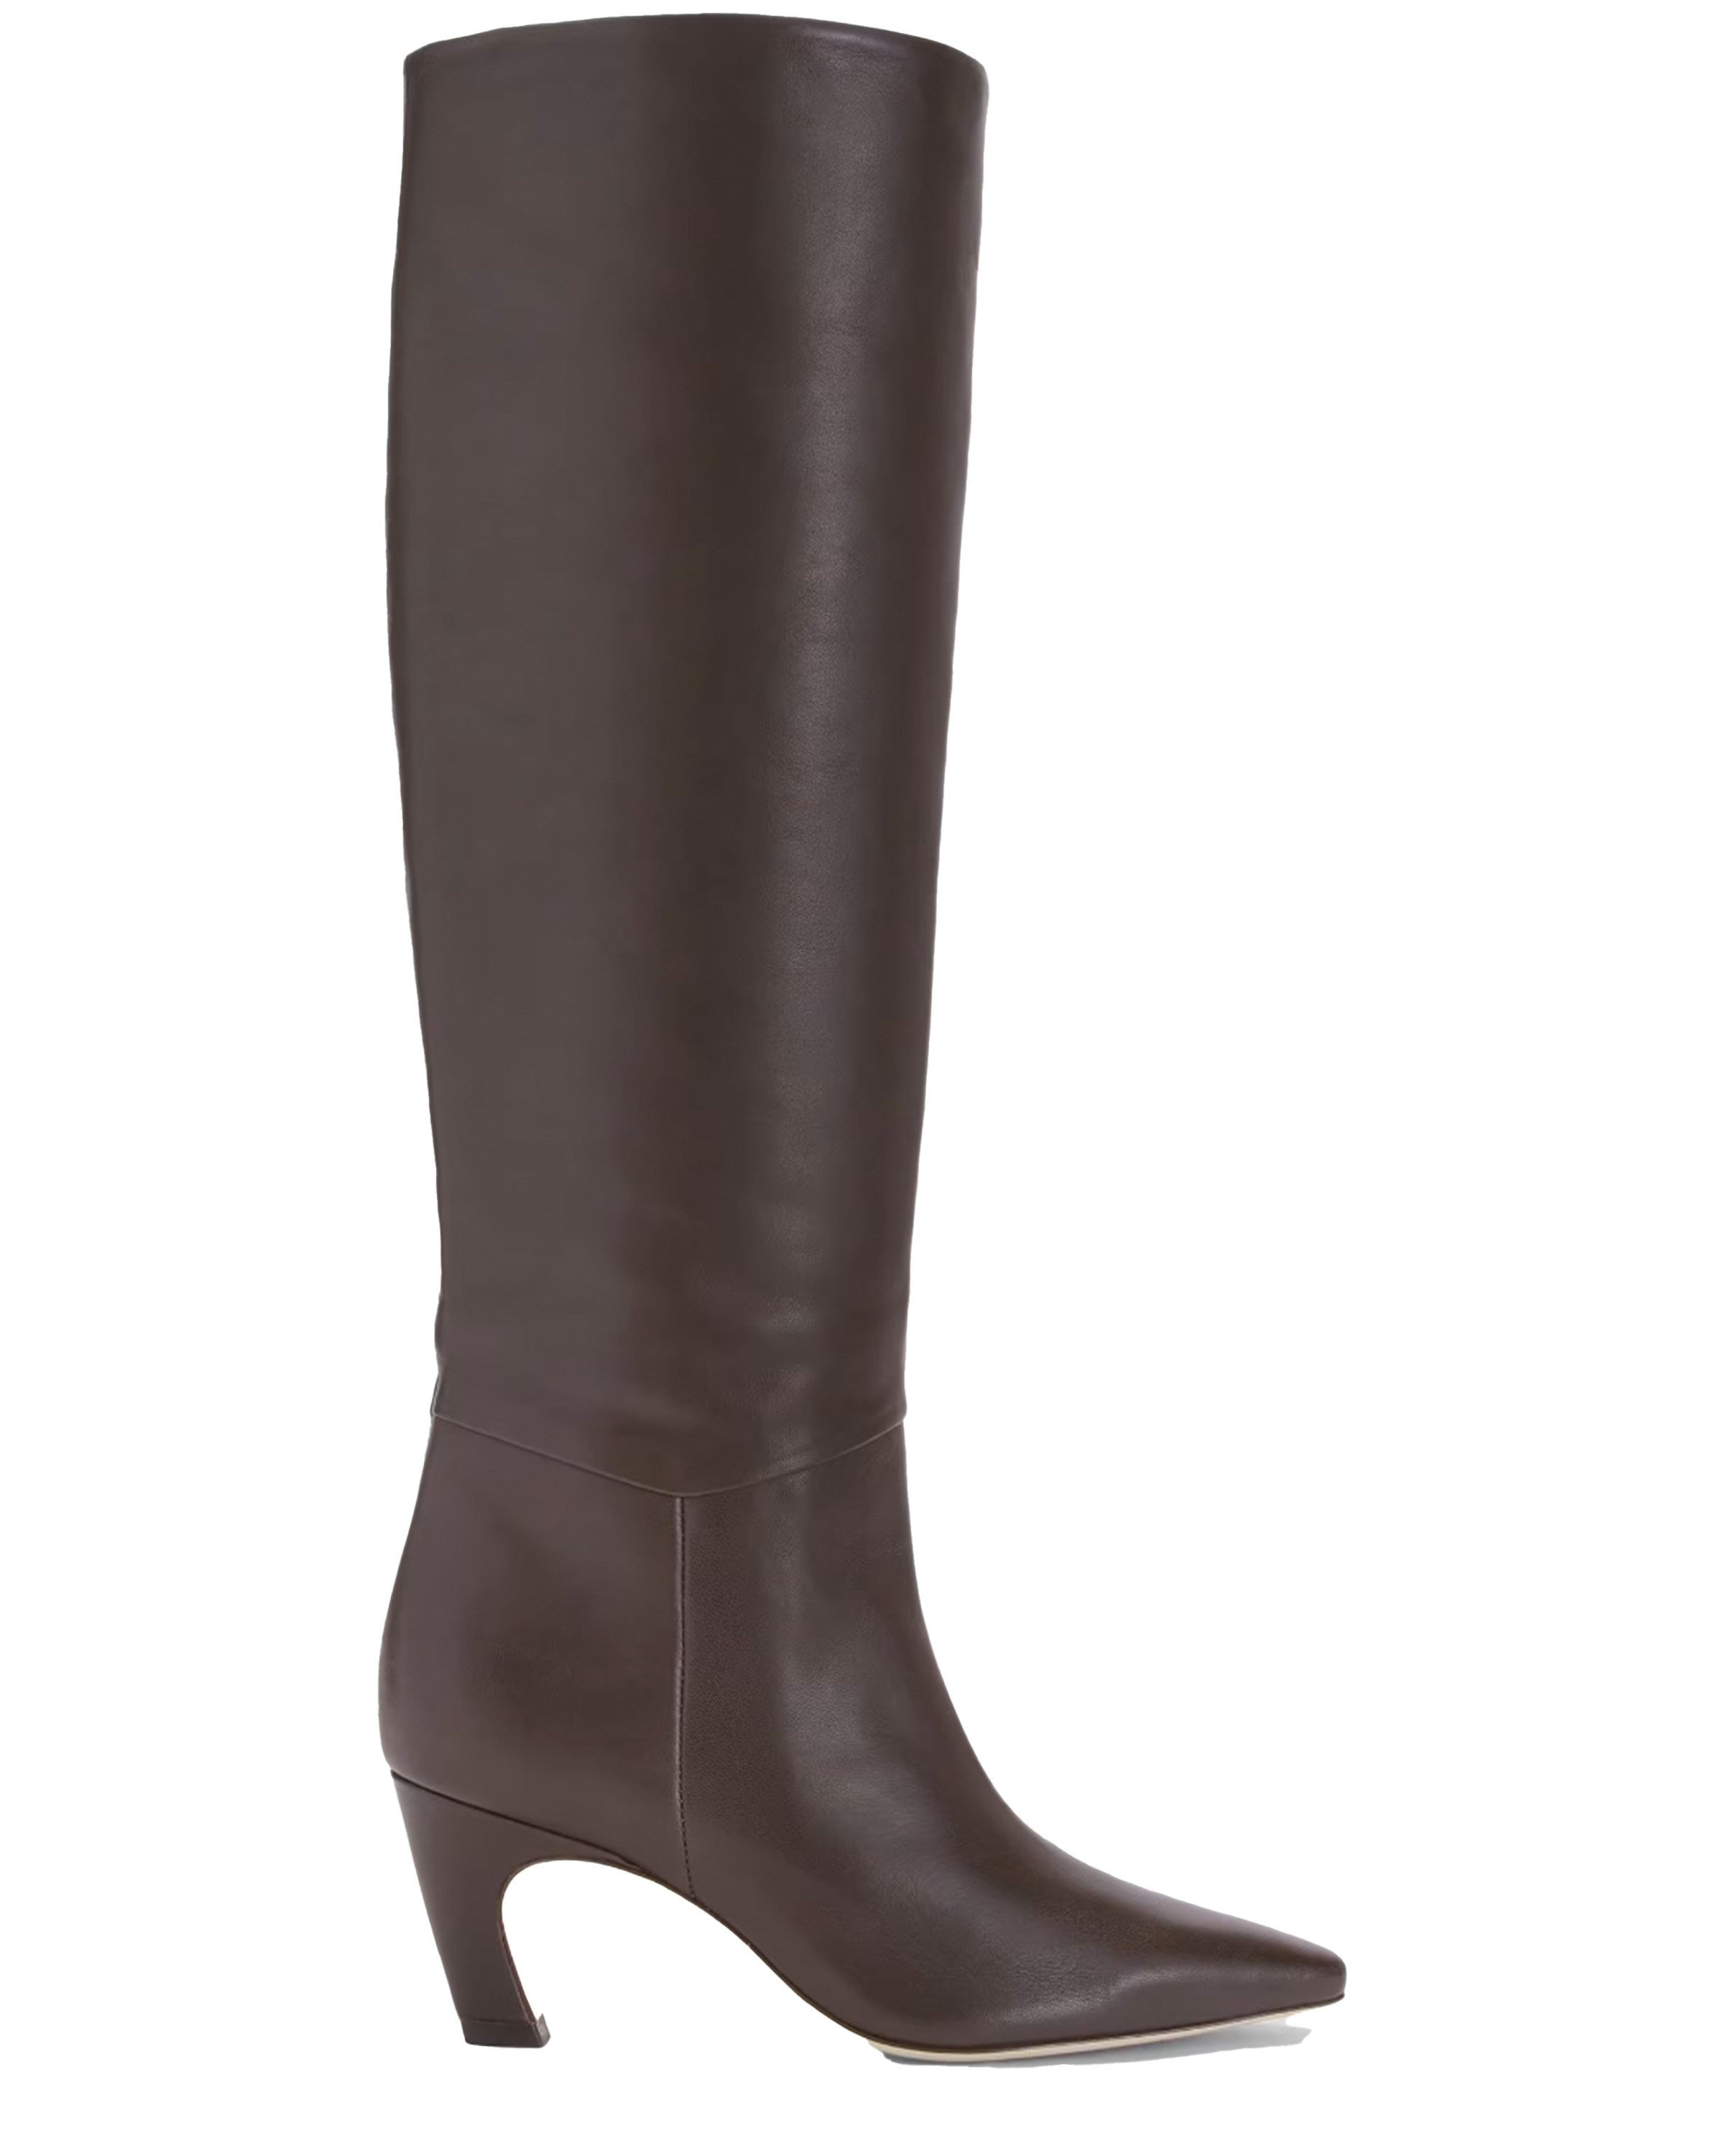 Reformation Remy Boots Review, Plus More Knee-High Boots We Love ...